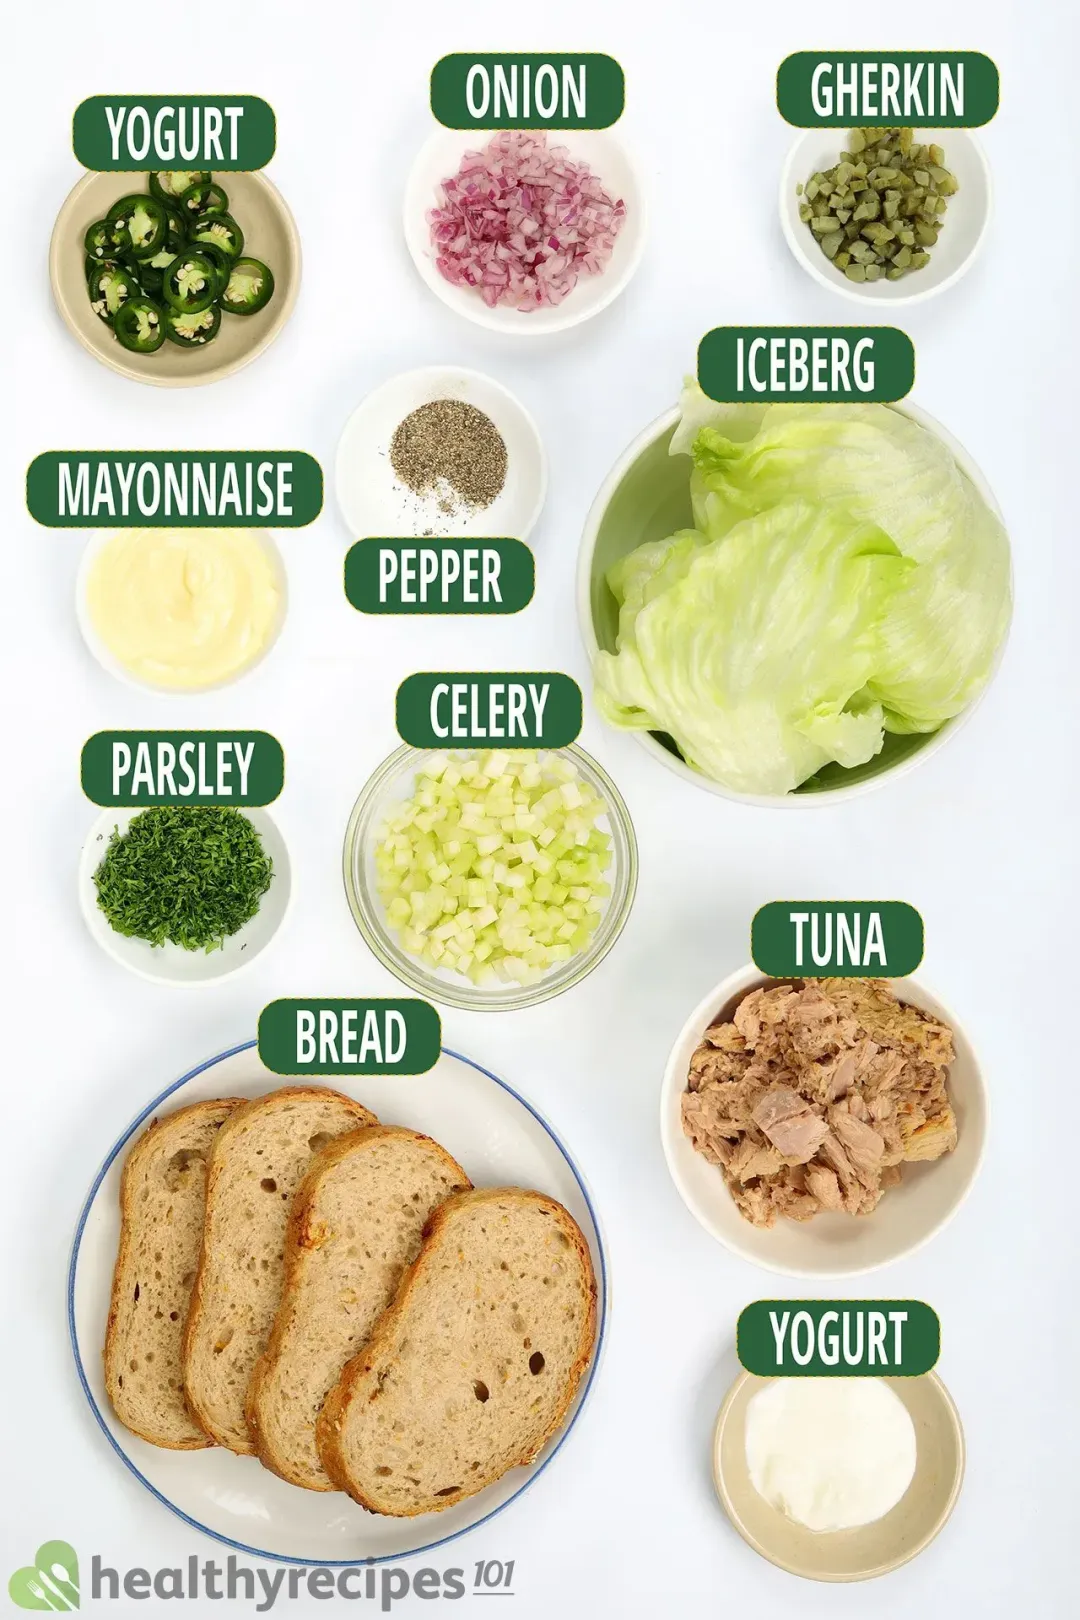 Ingredients for Classic Tuna Salad